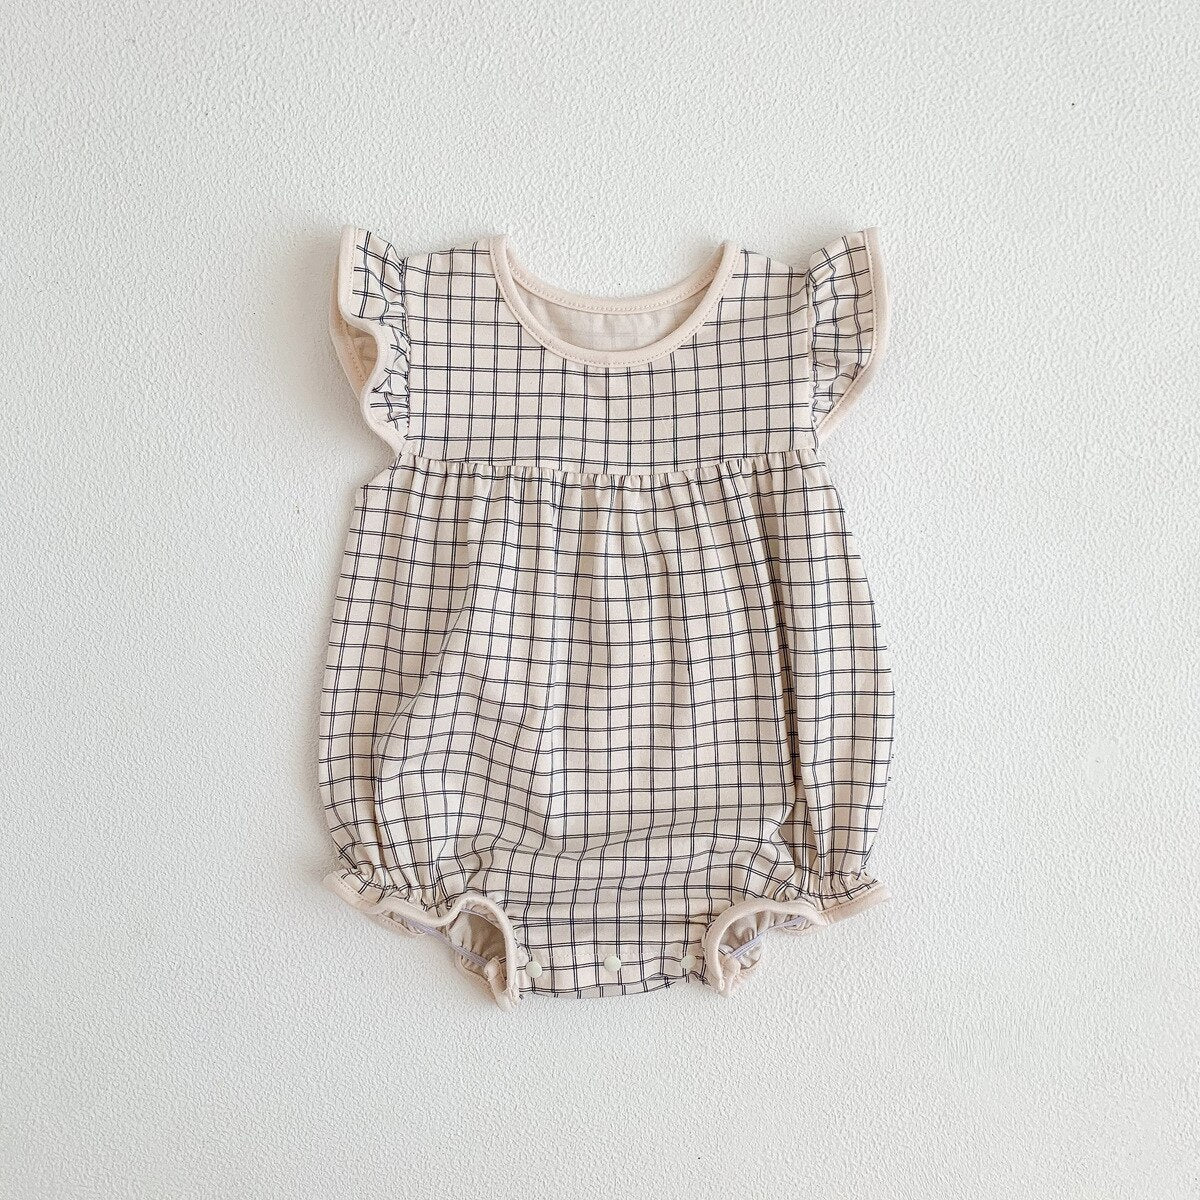 Infant Kids Girls Fly Sleeve Plaid Outwear Cotton Jumpsuits